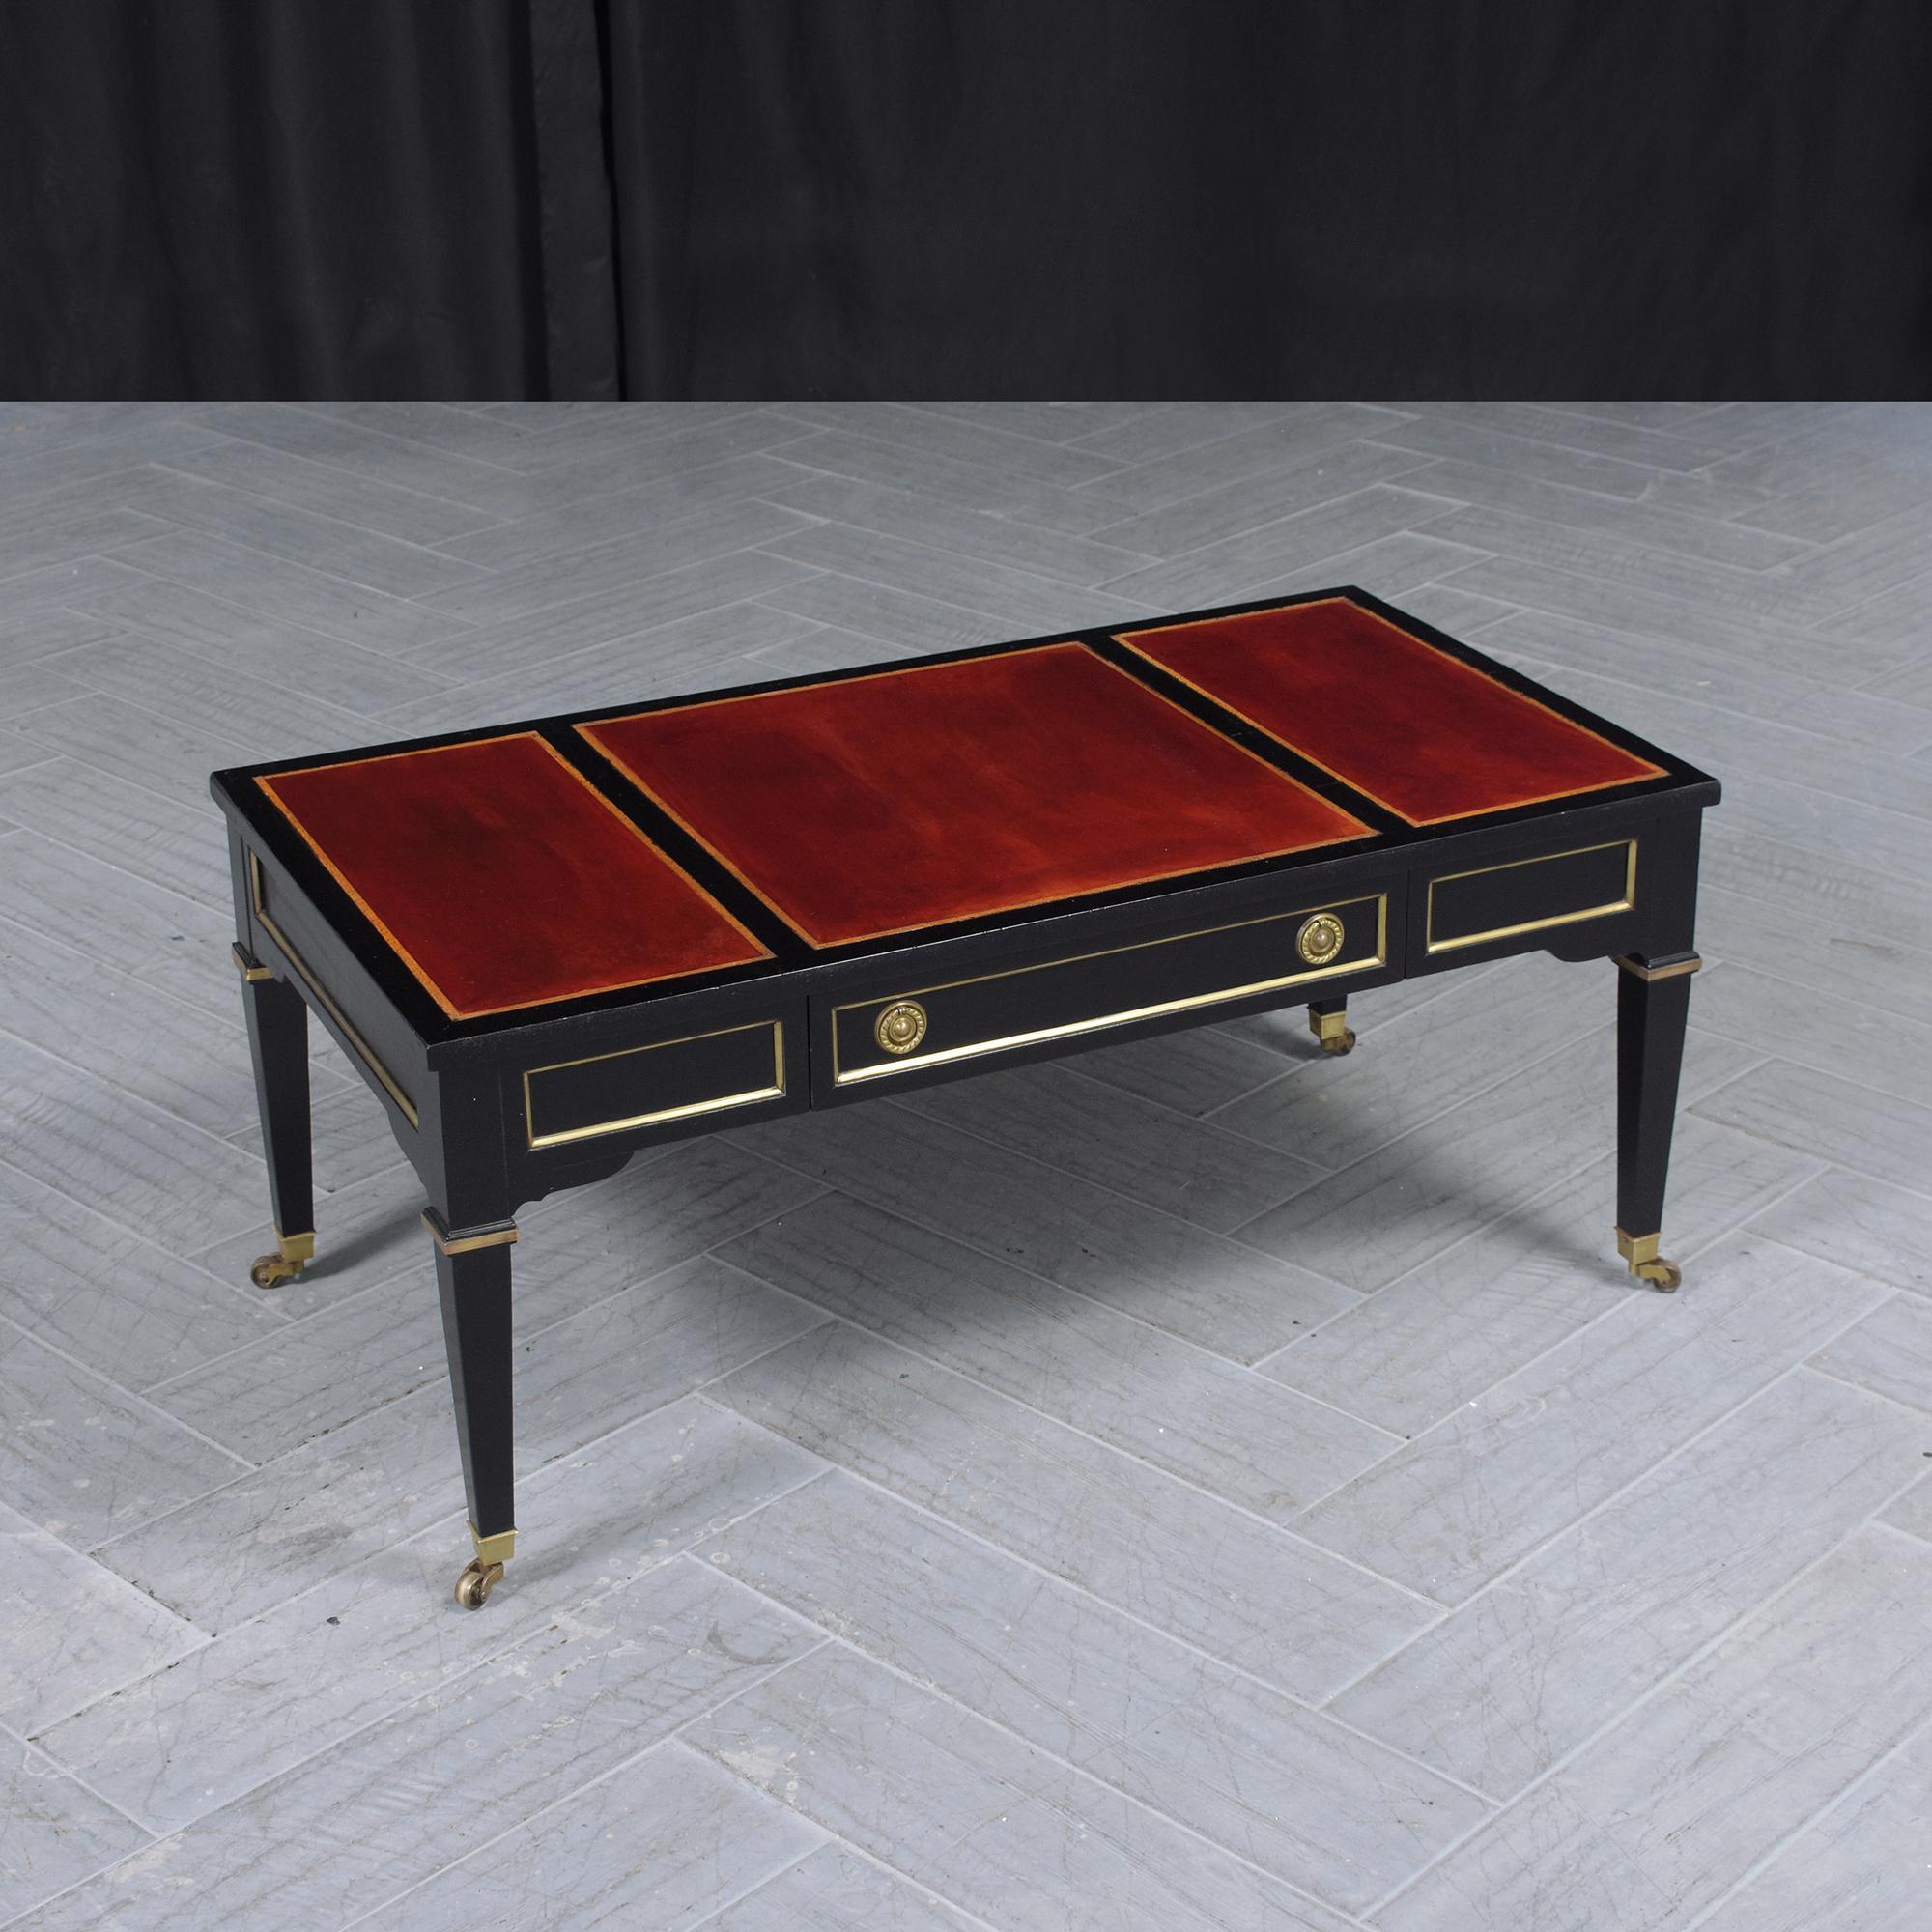 Mid-20th Century Hollywood Regency-Style Coffee Table by Heritage Henredon: 1960s Luxury For Sale